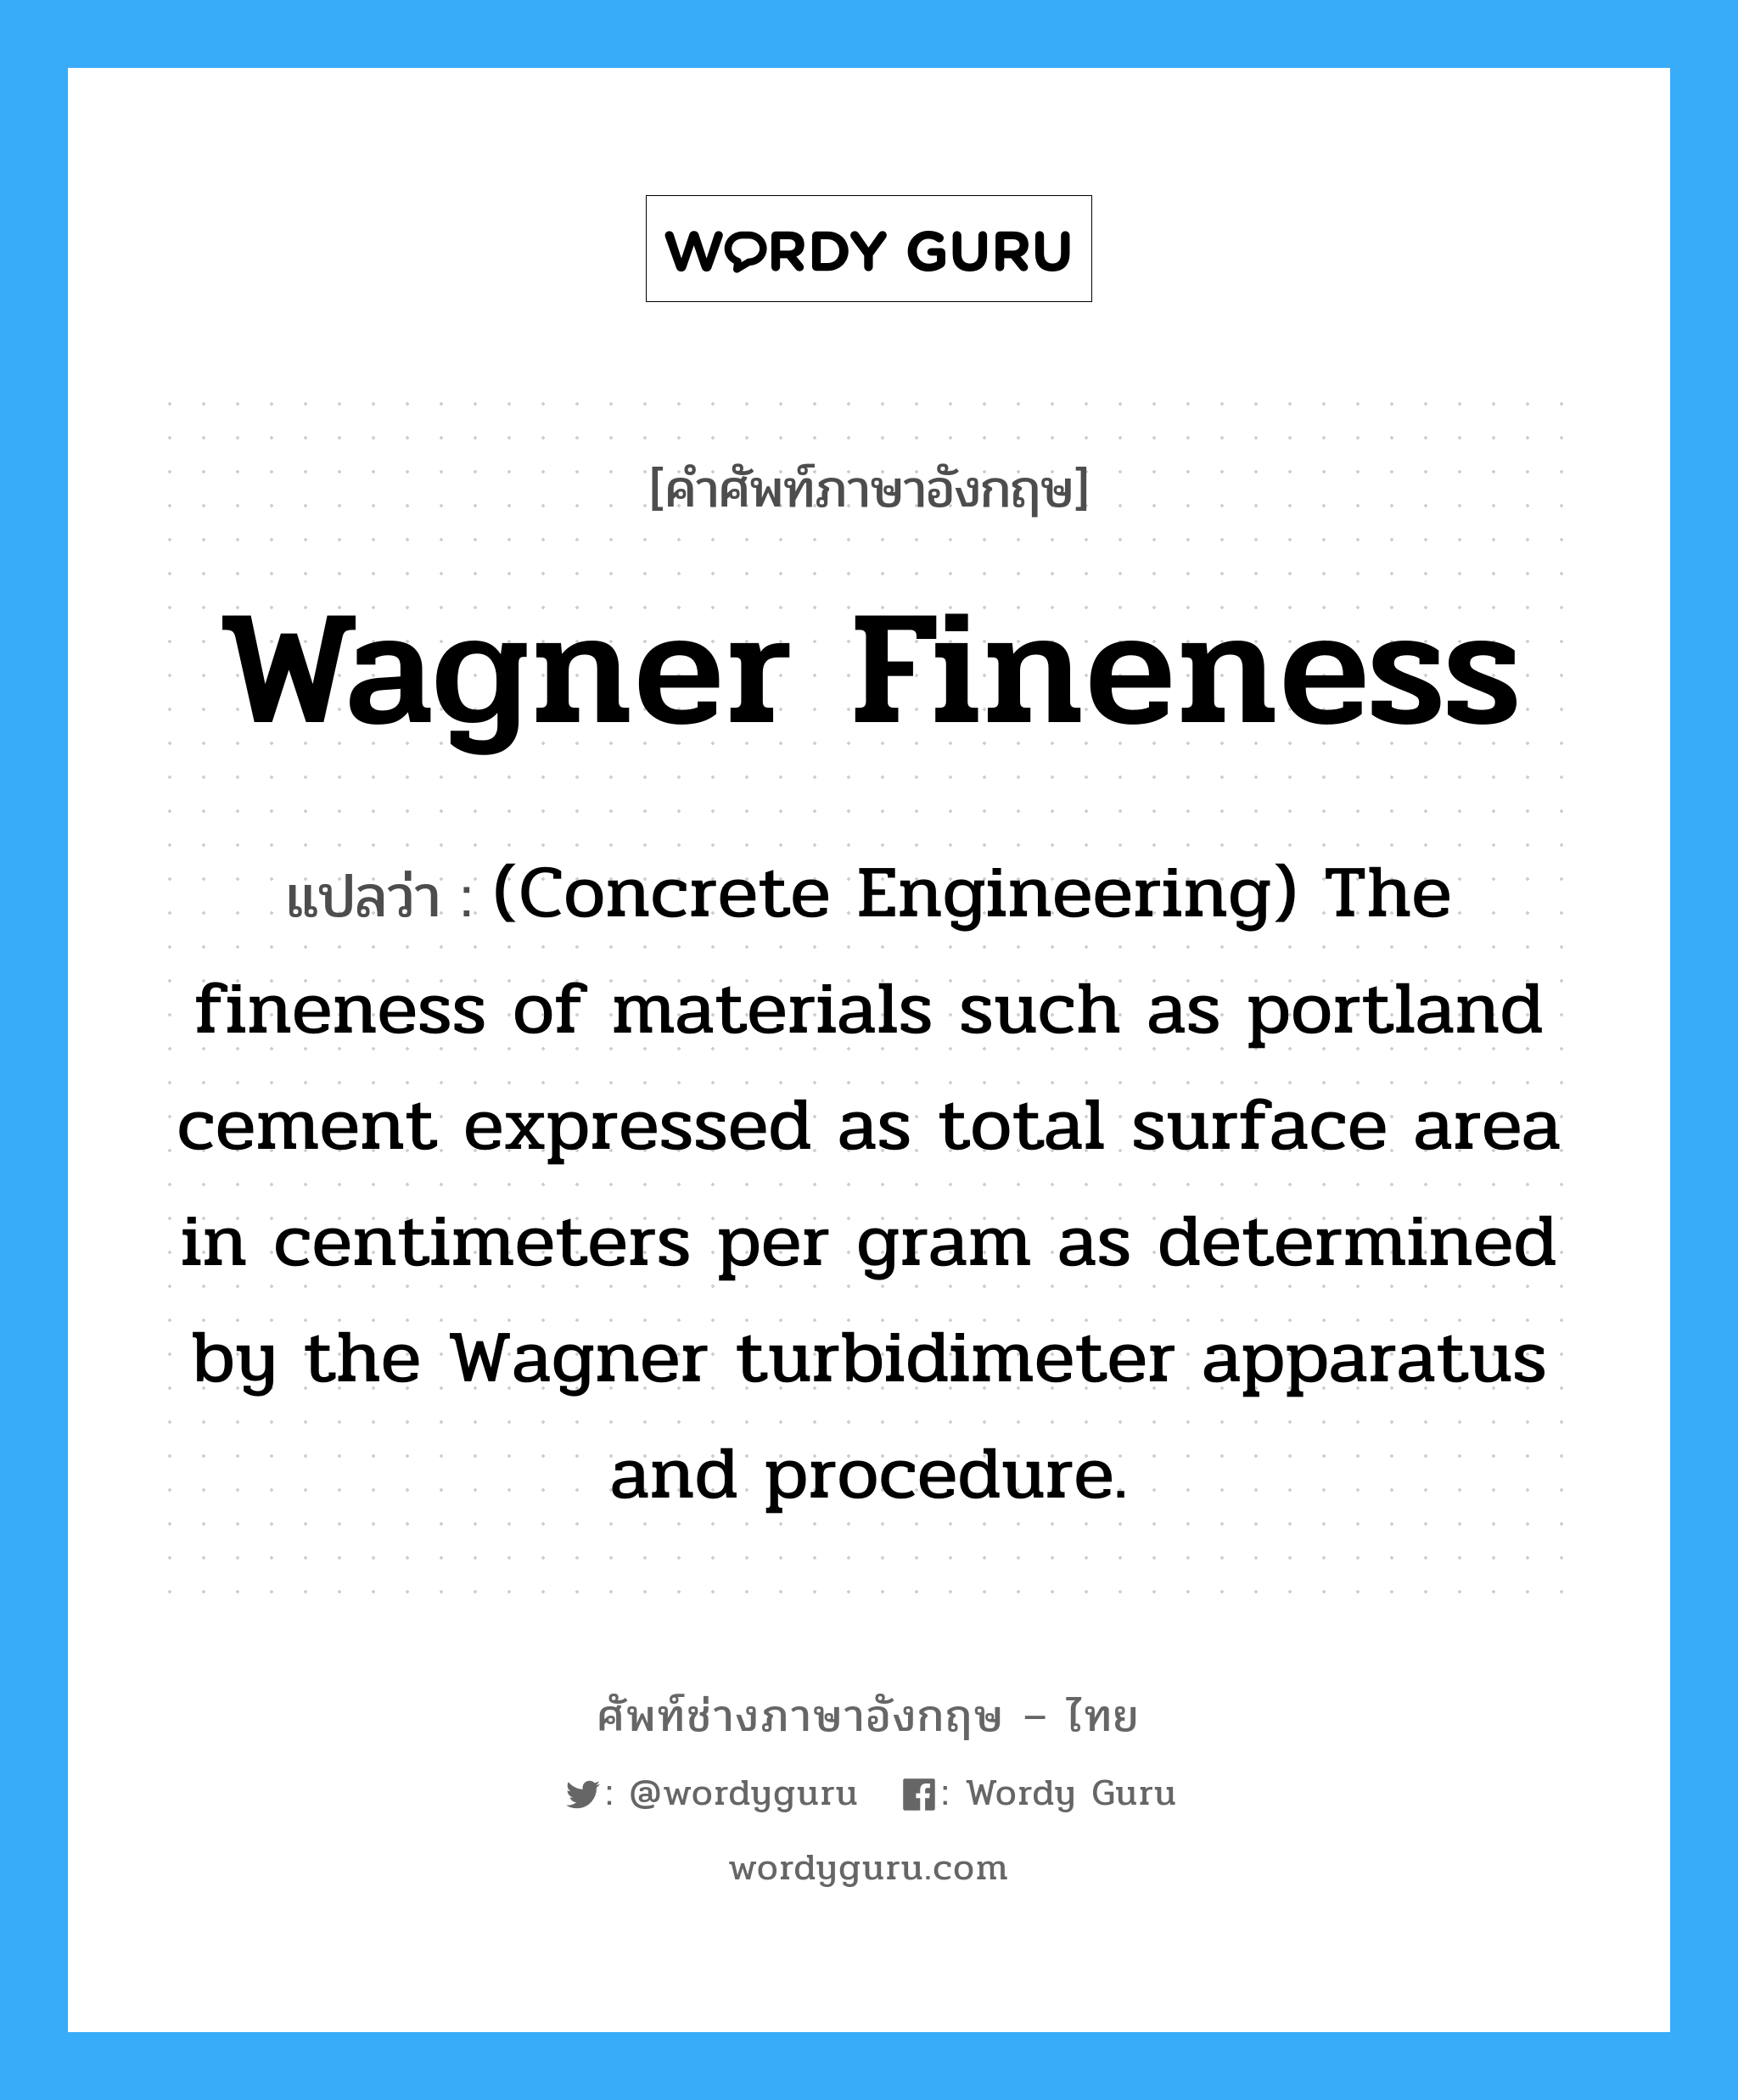 Wagner Fineness แปลว่า?, คำศัพท์ช่างภาษาอังกฤษ - ไทย Wagner Fineness คำศัพท์ภาษาอังกฤษ Wagner Fineness แปลว่า (Concrete Engineering) The fineness of materials such as portland cement expressed as total surface area in centimeters per gram as determined by the Wagner turbidimeter apparatus and procedure.